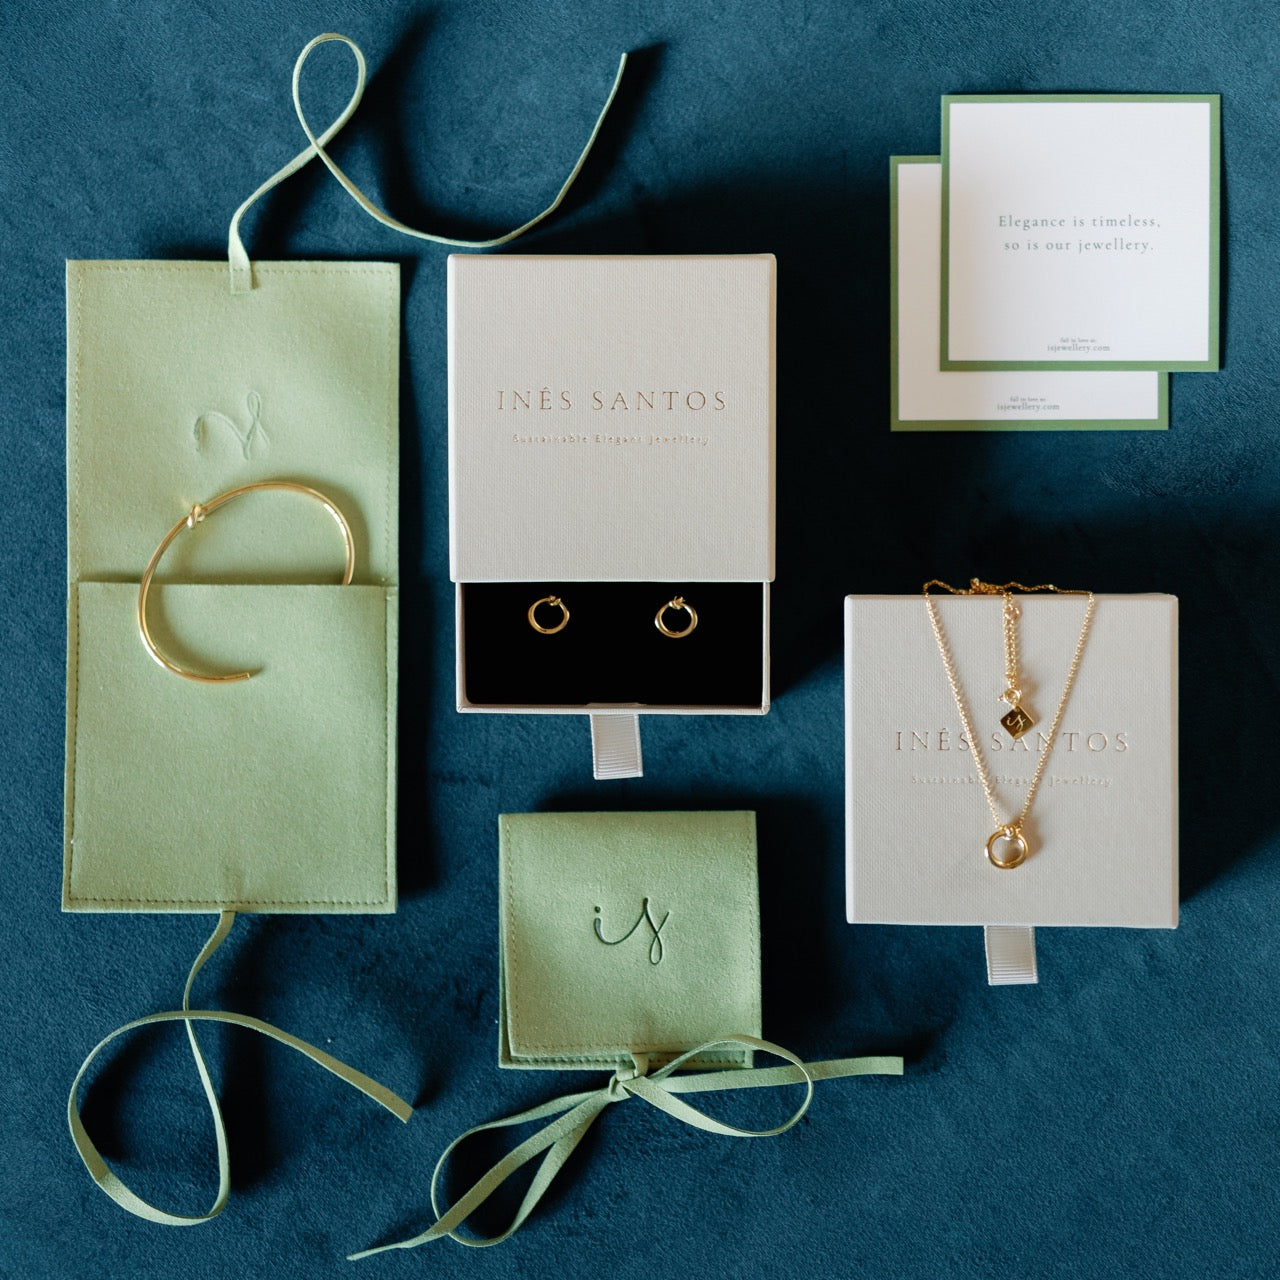 Ines Santos Jewellery - 18K Gold Vermeil and 18K Solid Gold Jewellery - Signature Gifting